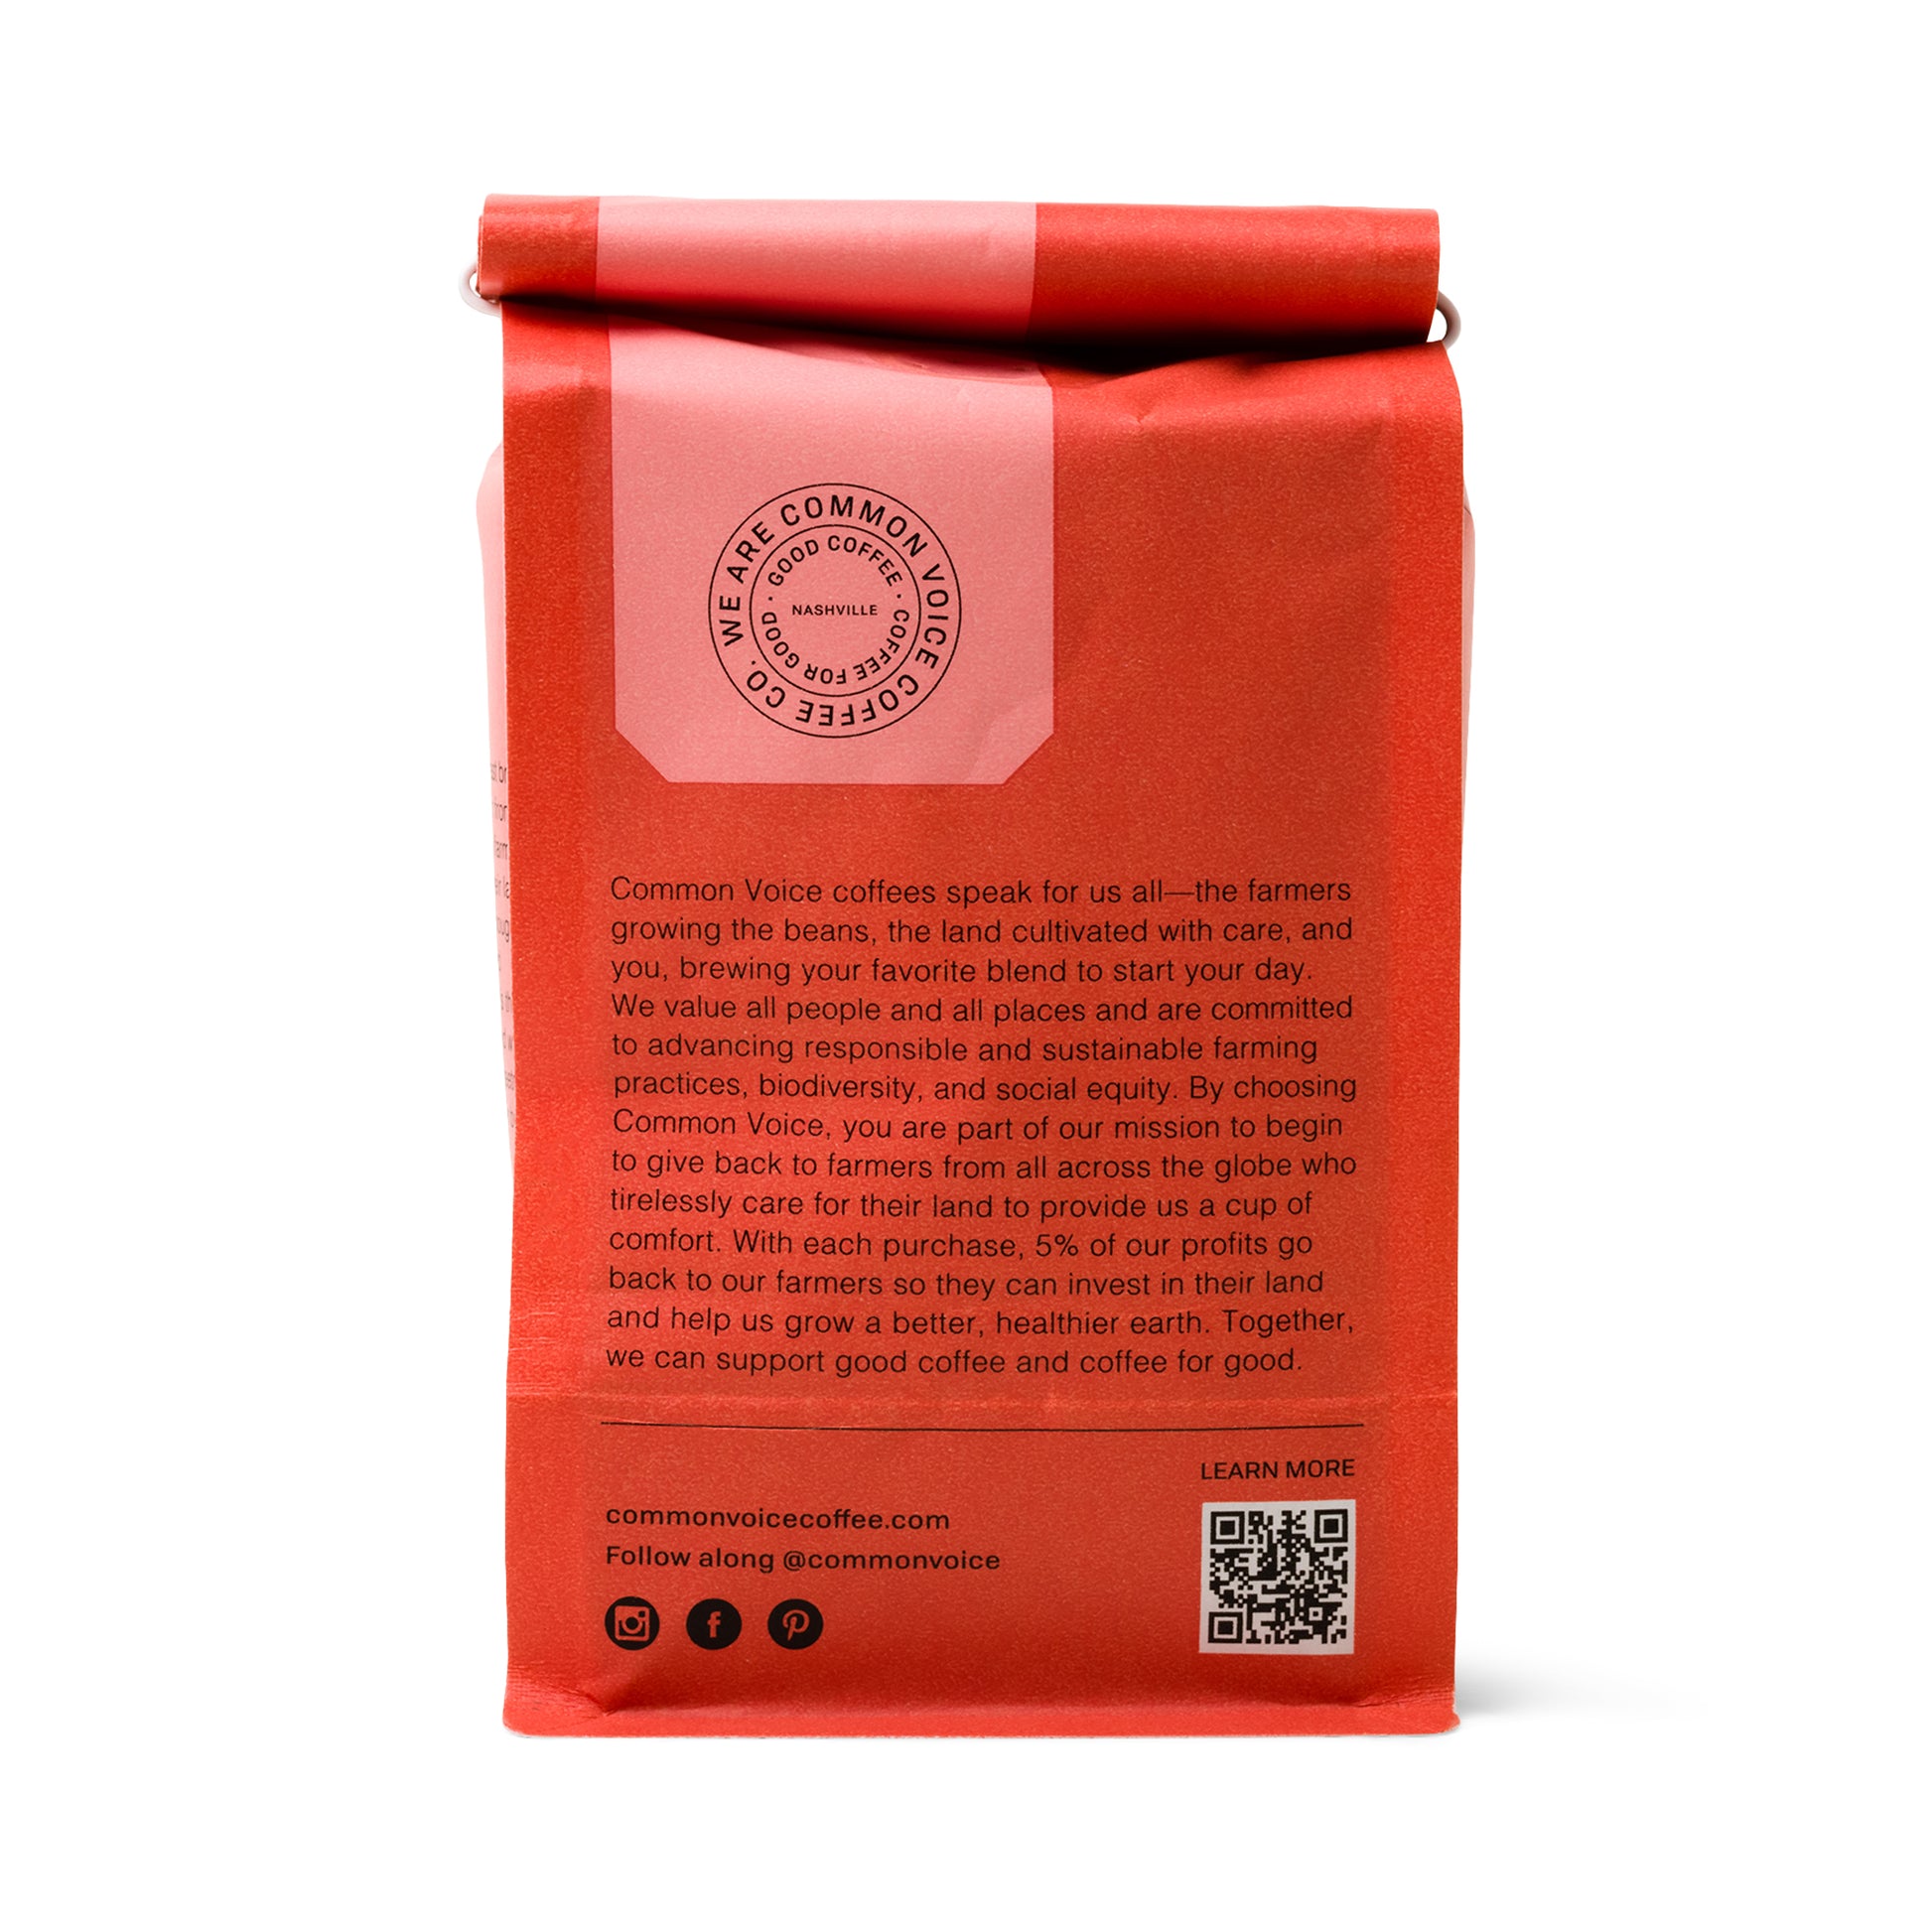 Compass Common Voice Coffee bag in a red color - back of bag